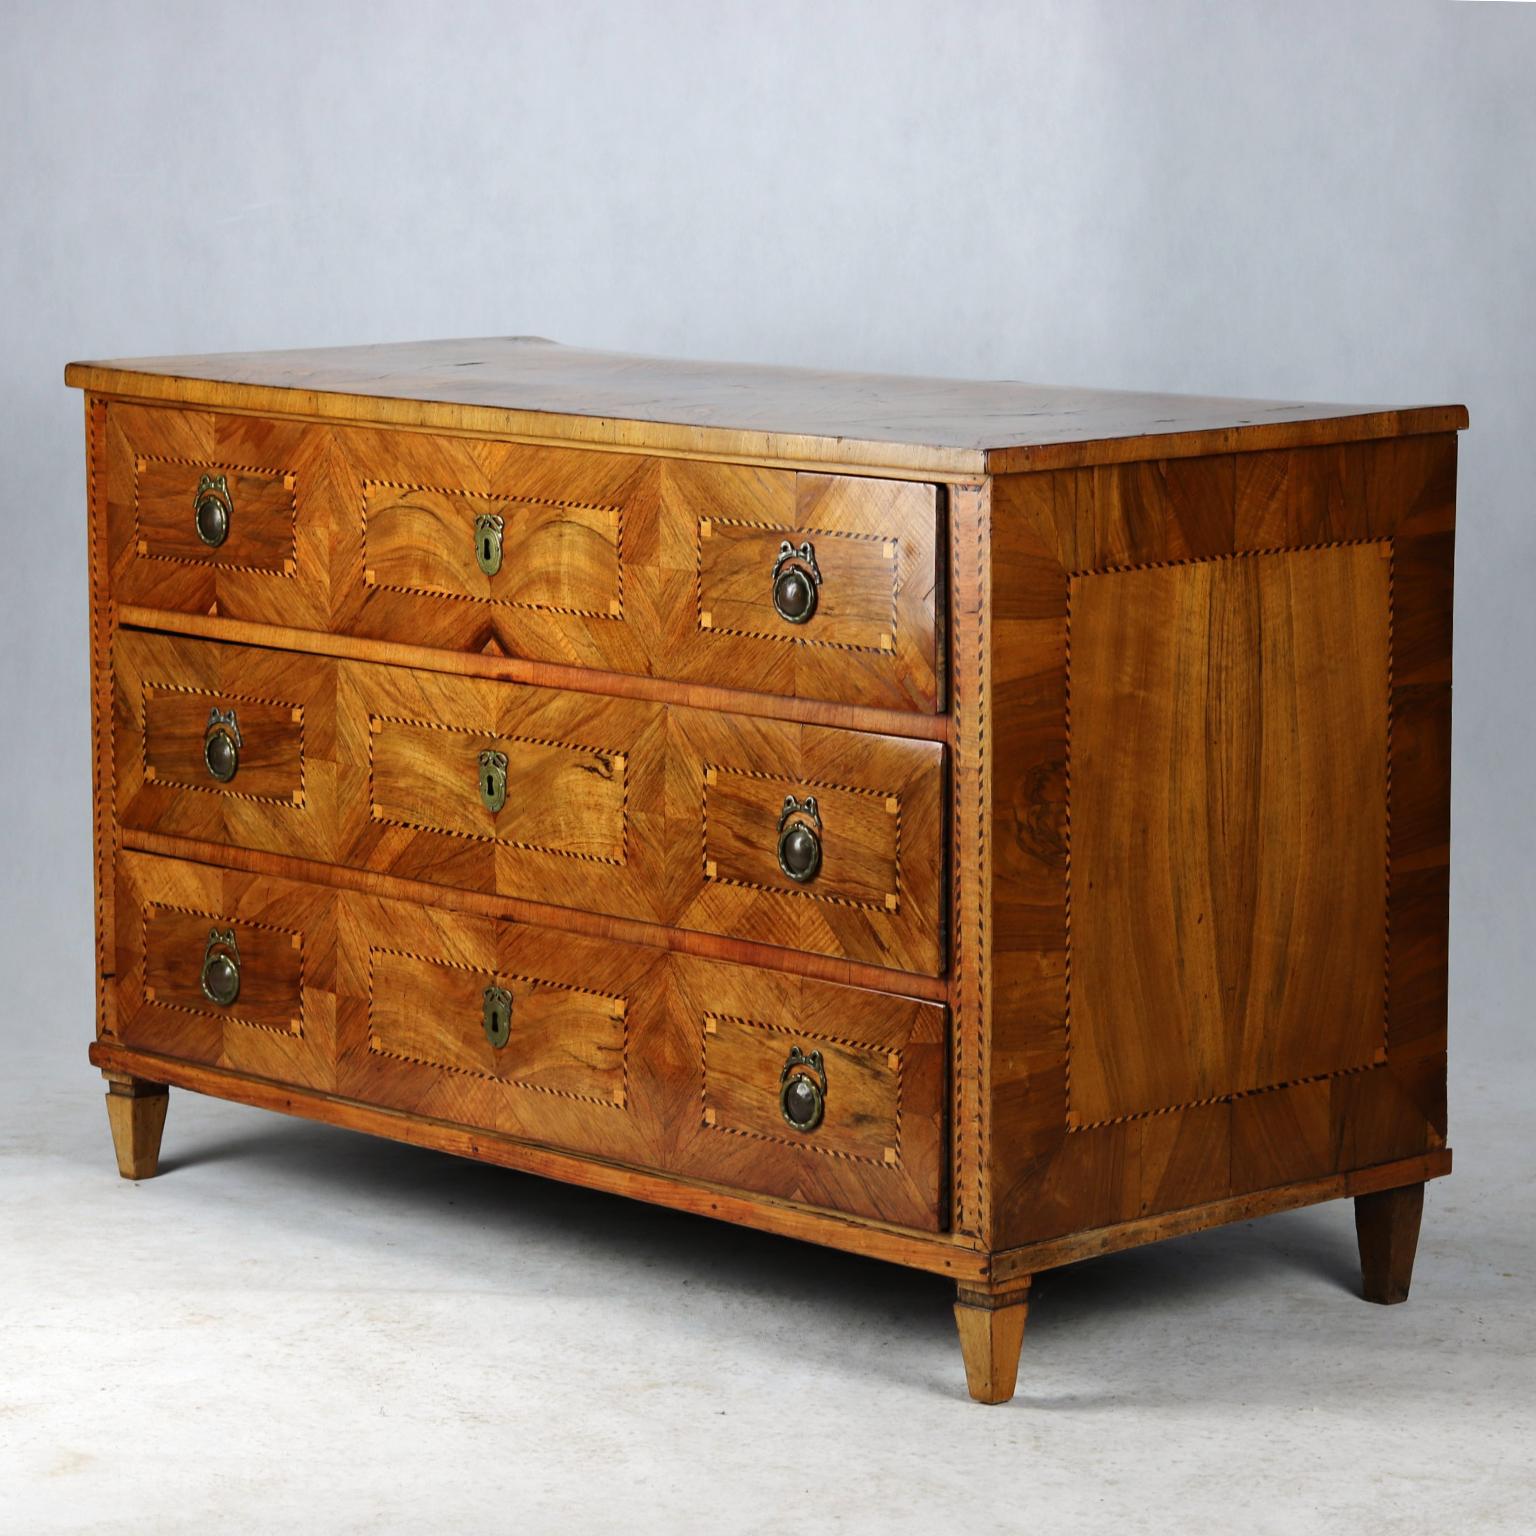 German Neoclassical Walnut Chest of Drawers, Commode Early 19th Century